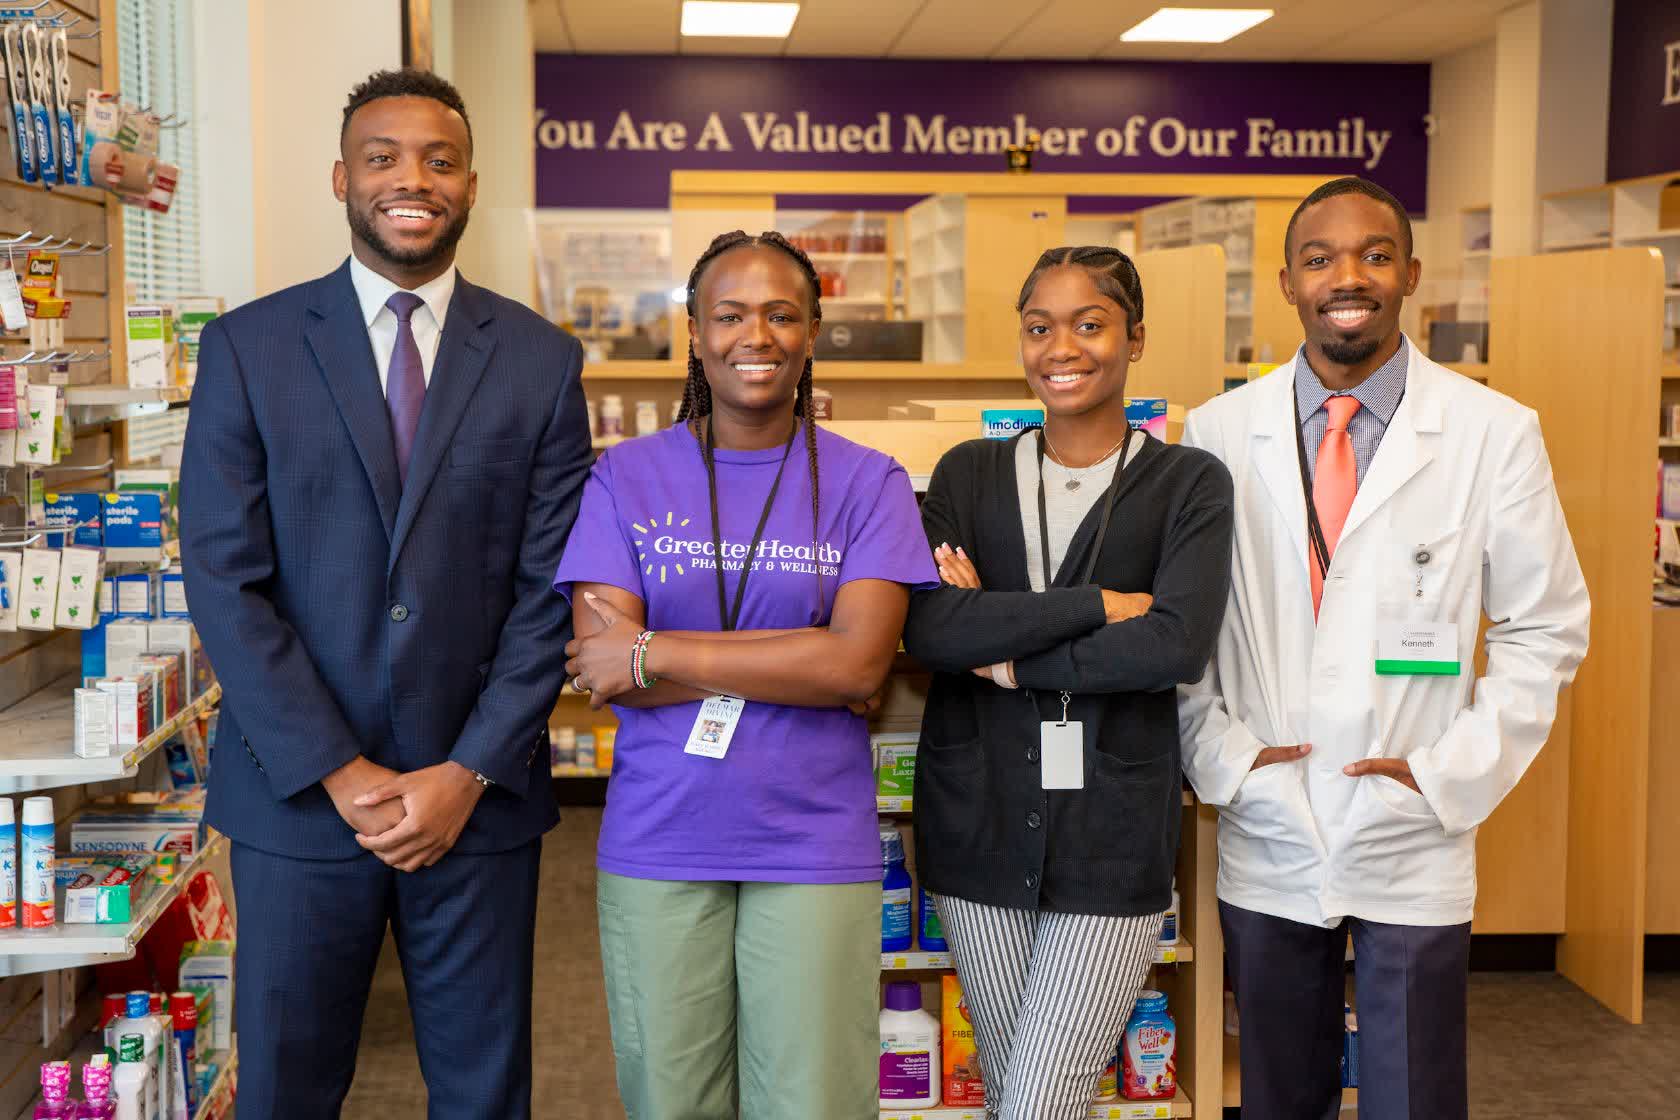 New Black-Owned Pharmacy Startup Combines Convenience Of Walgreens And Amazon To Bridge Gap In Health Care Crisis